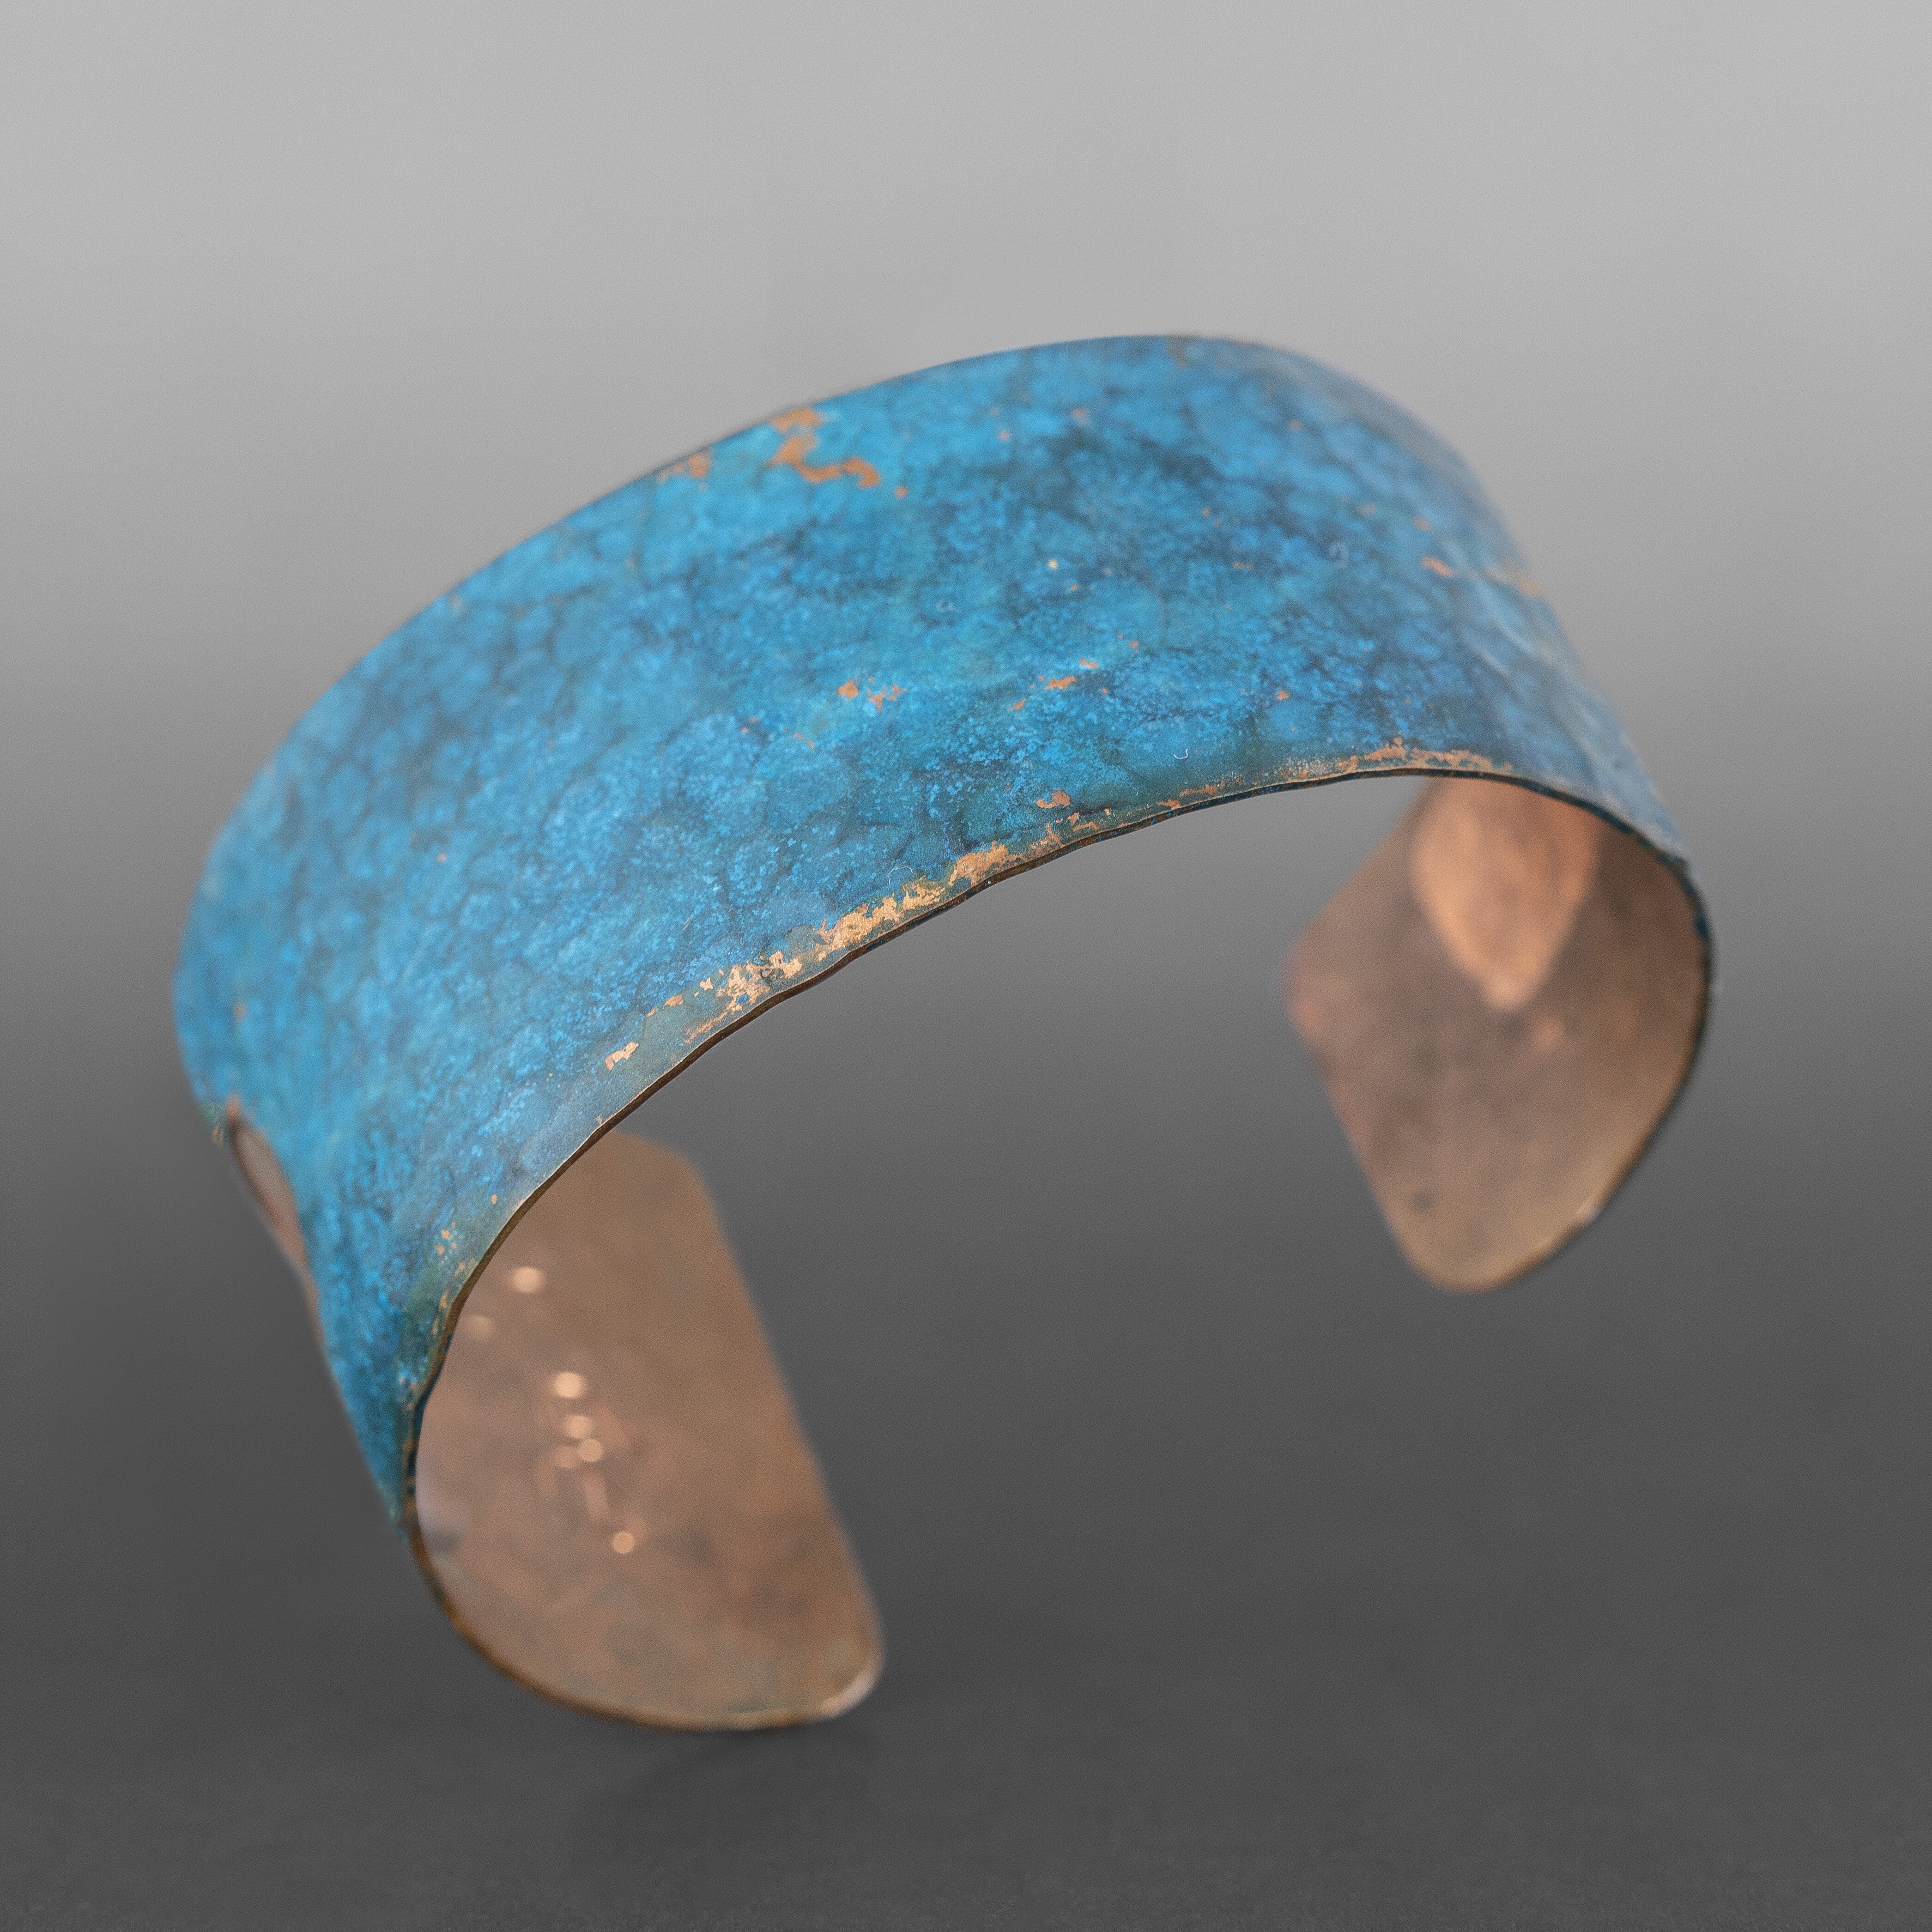 Blue Hammered Cuff
Jennifer Younger
Tlingit
Patinated copper
1¼” tapered
$275